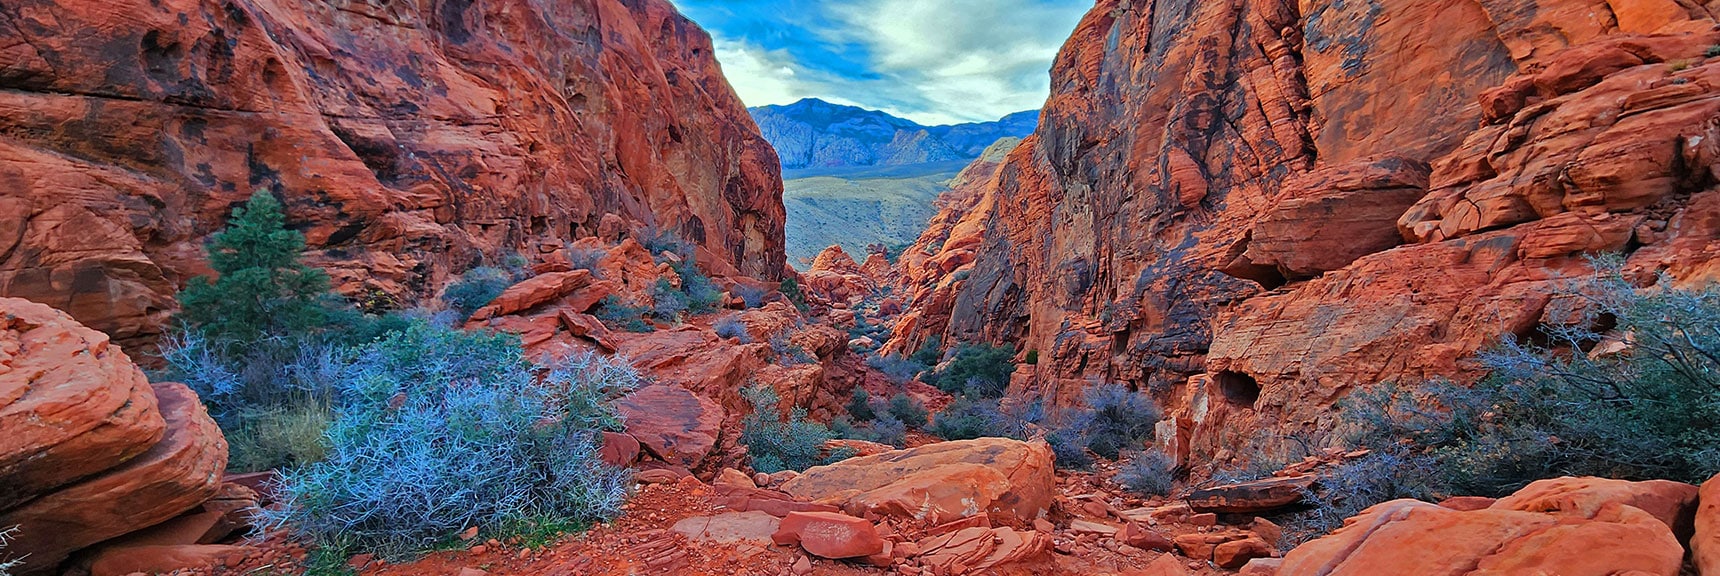 Red Rock Canyon Seen from the Same Spot. Pretty Spectacular! | Upper Calico Hills Loop | Calico Basin and Red Rock Canyon, Nevada